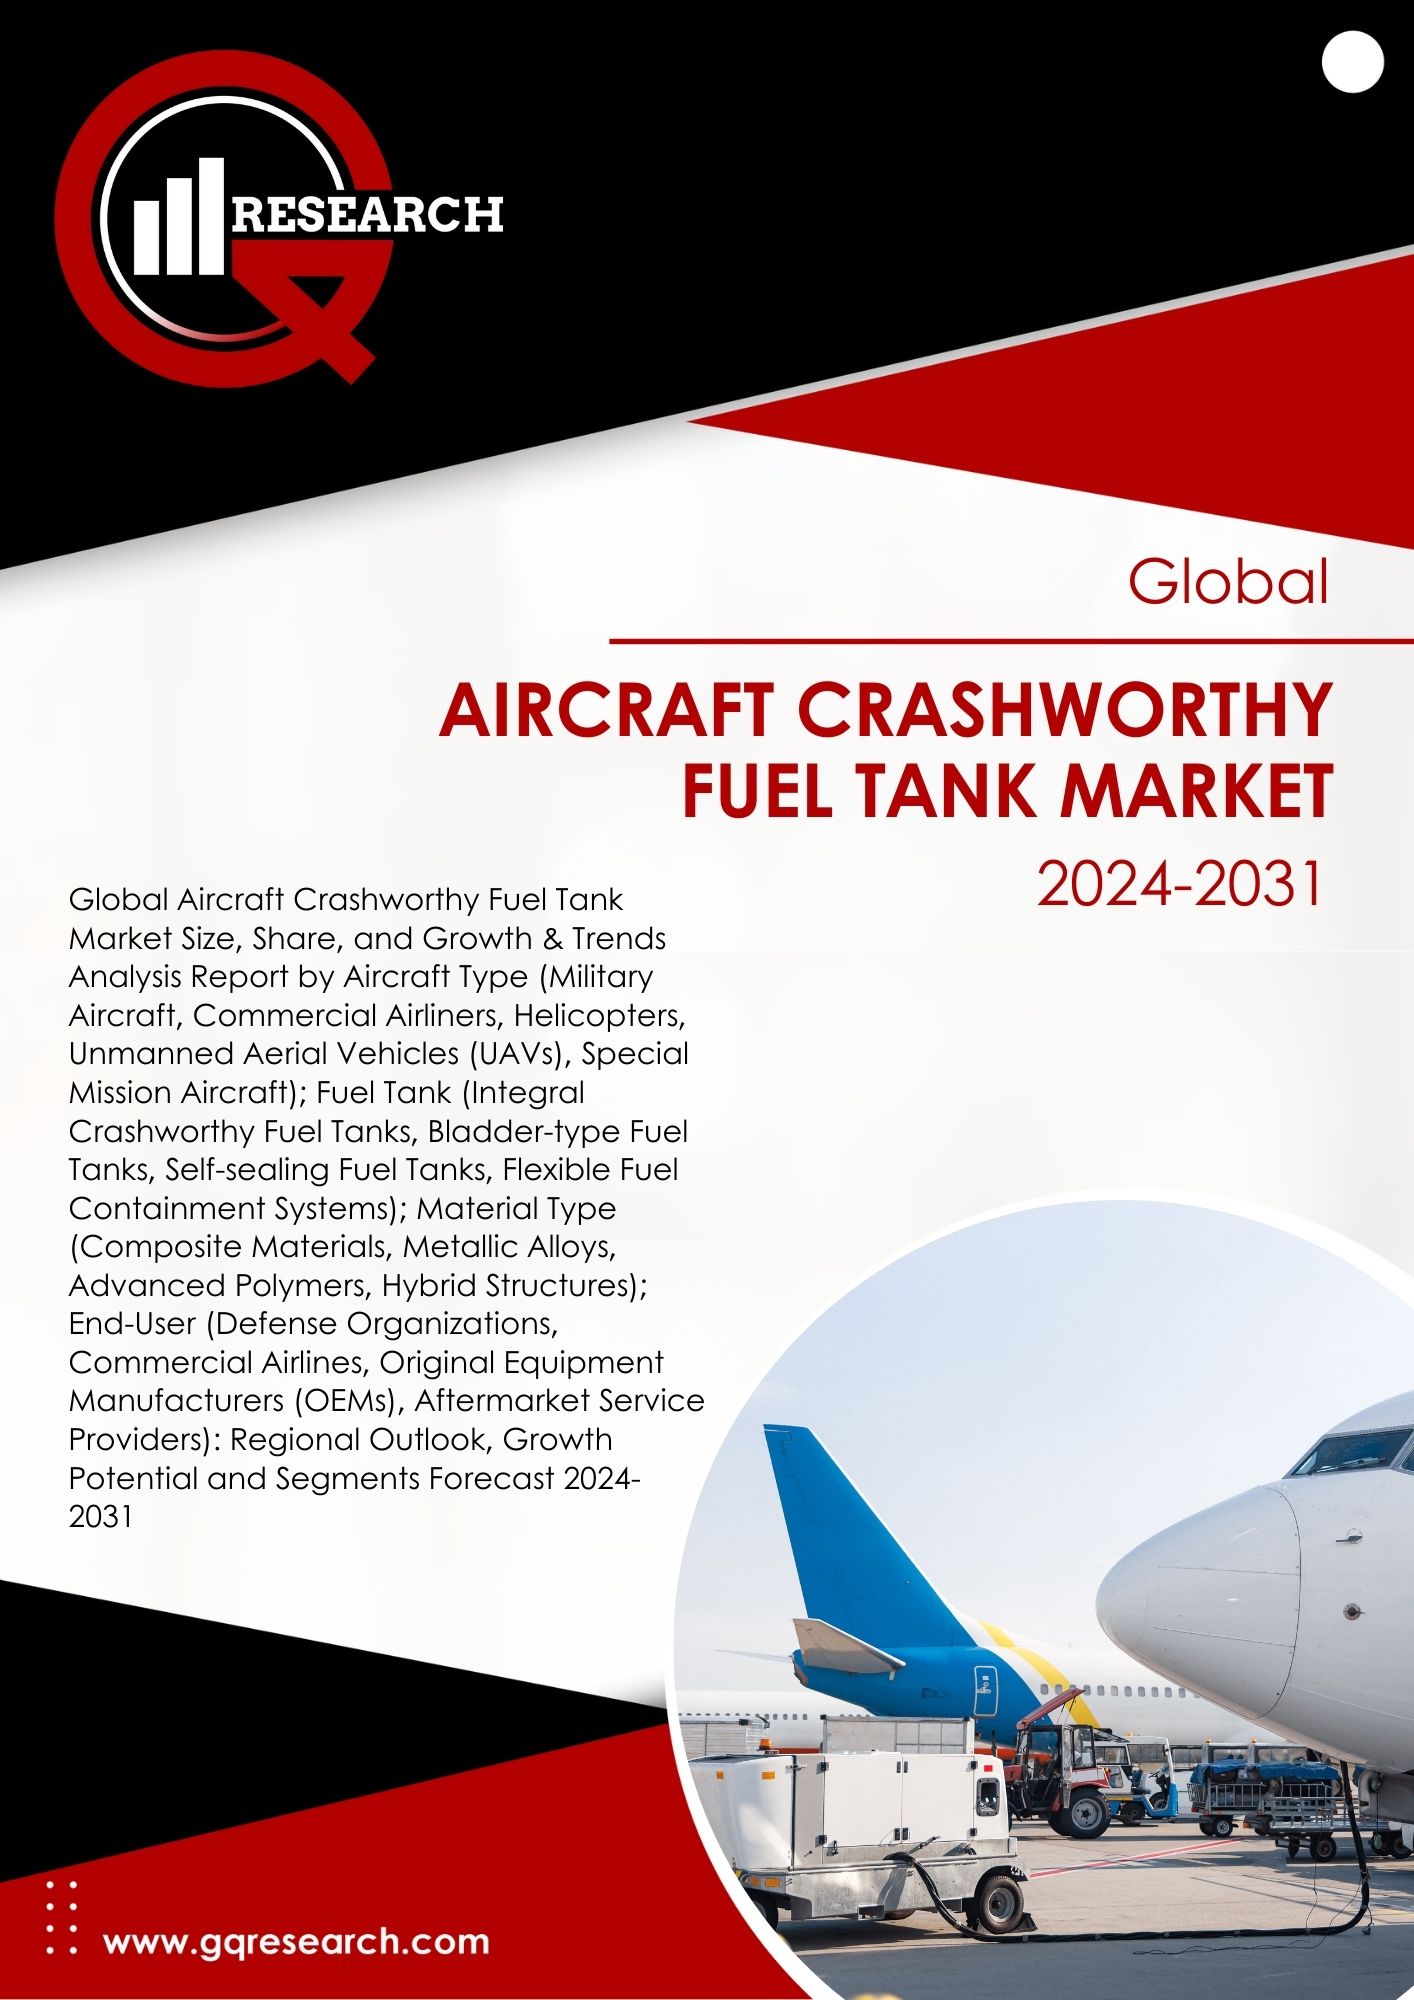 Aircraft Crashworthy Fuel Tank Market Size, Share, Growth and Forecast to 2031 | GQ Research